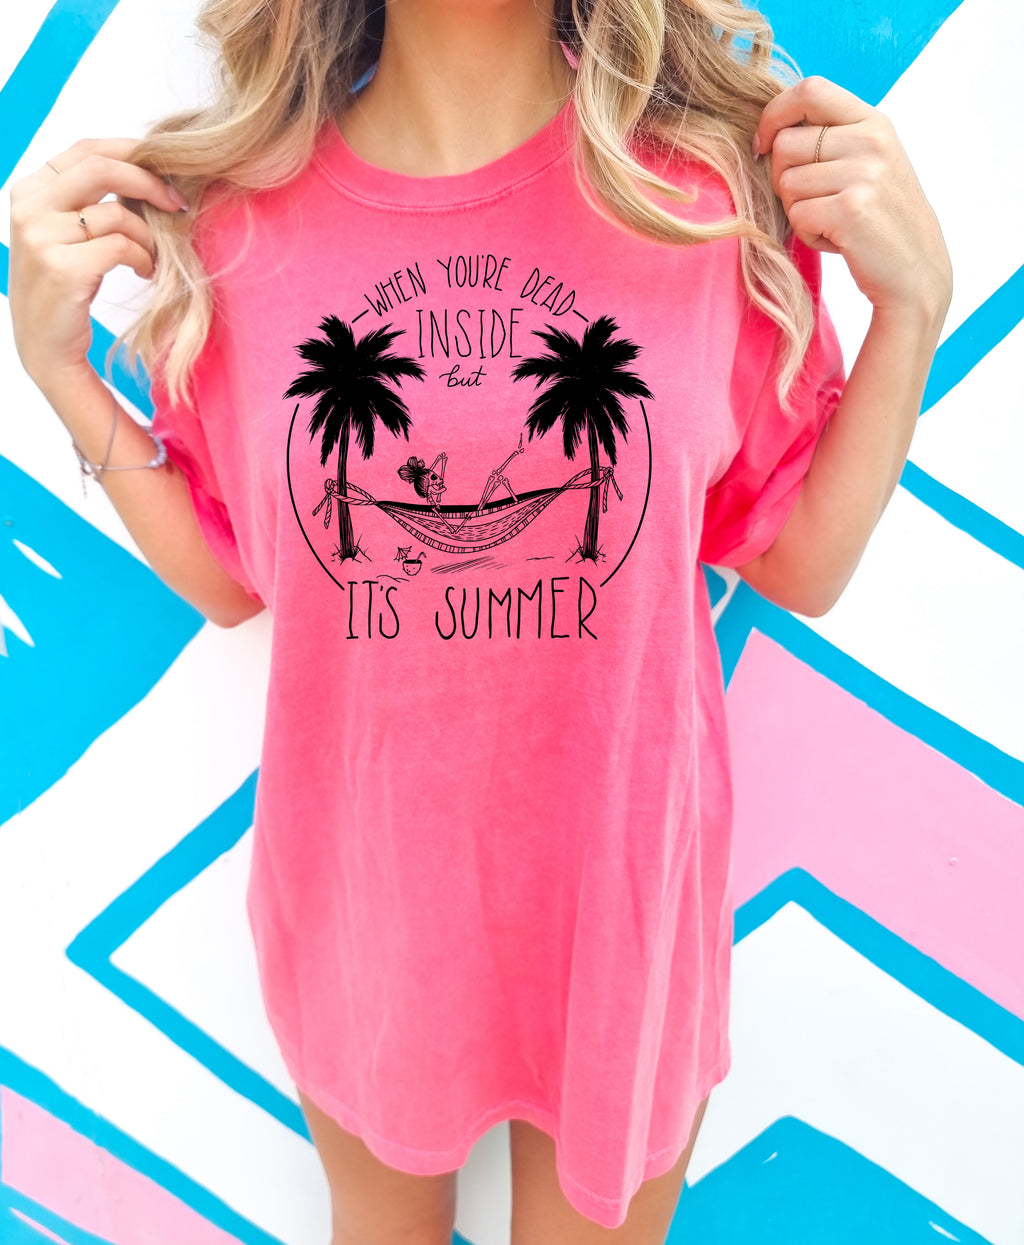 When you're Dead Inside but it's Summer - Comfort Colors Adult Tee